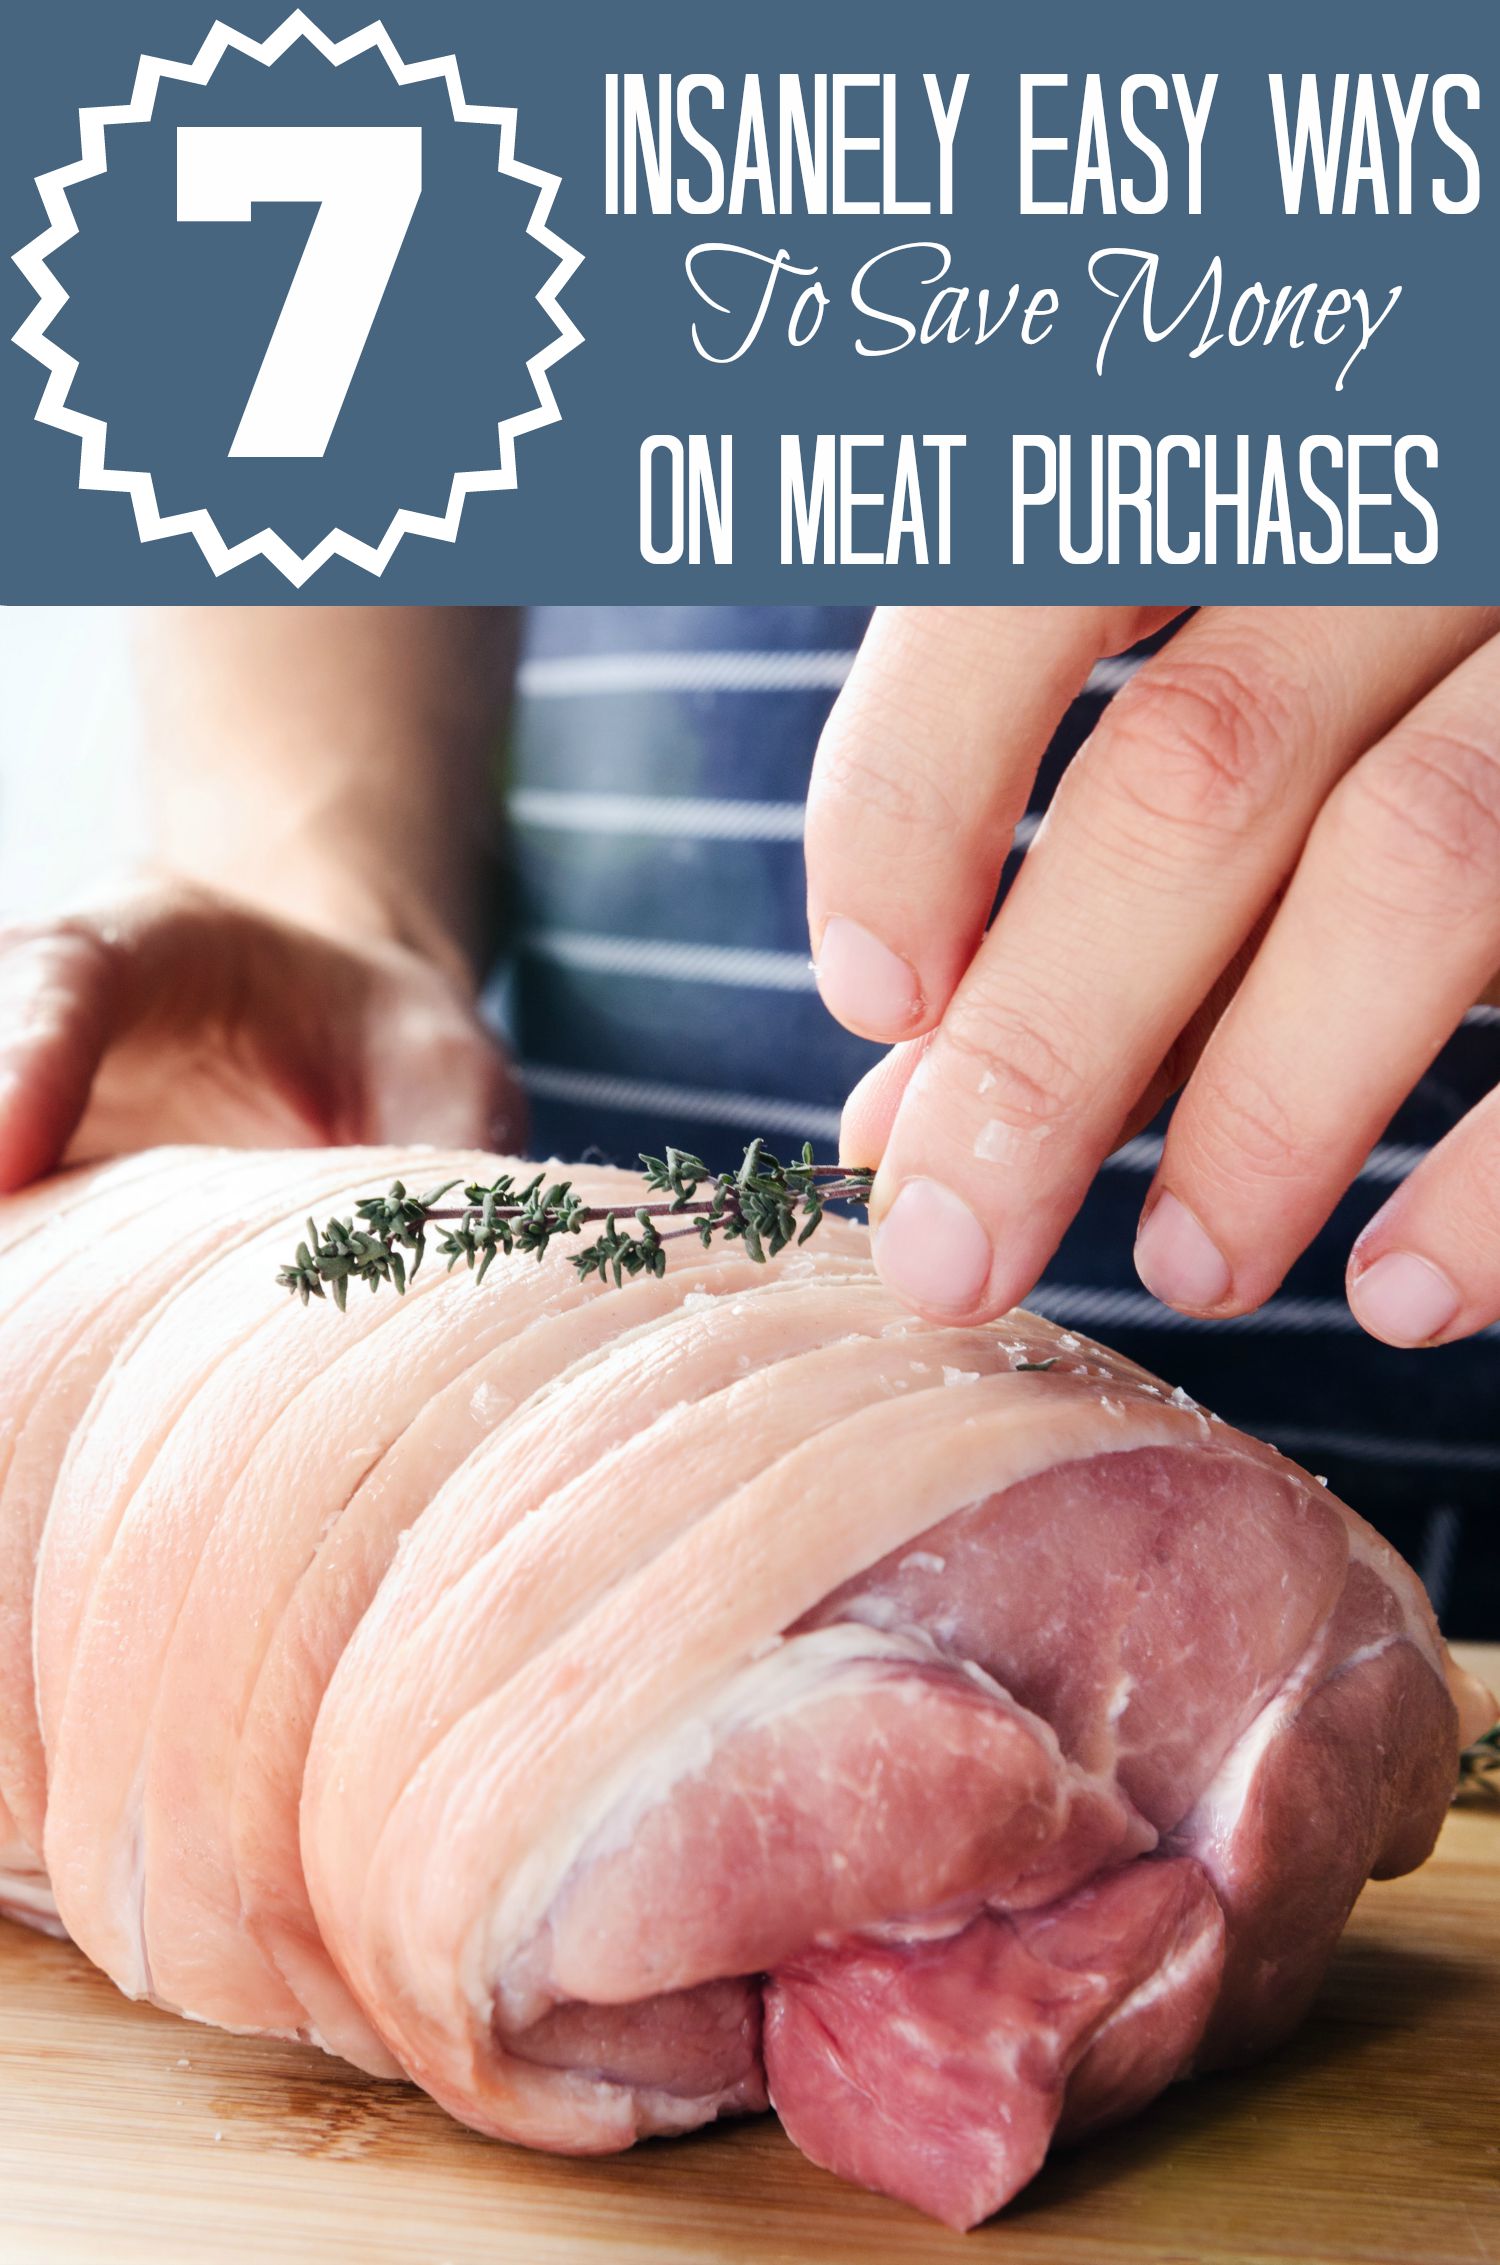 7 Insanely Easy Ways To Save Money On Meat Purchases